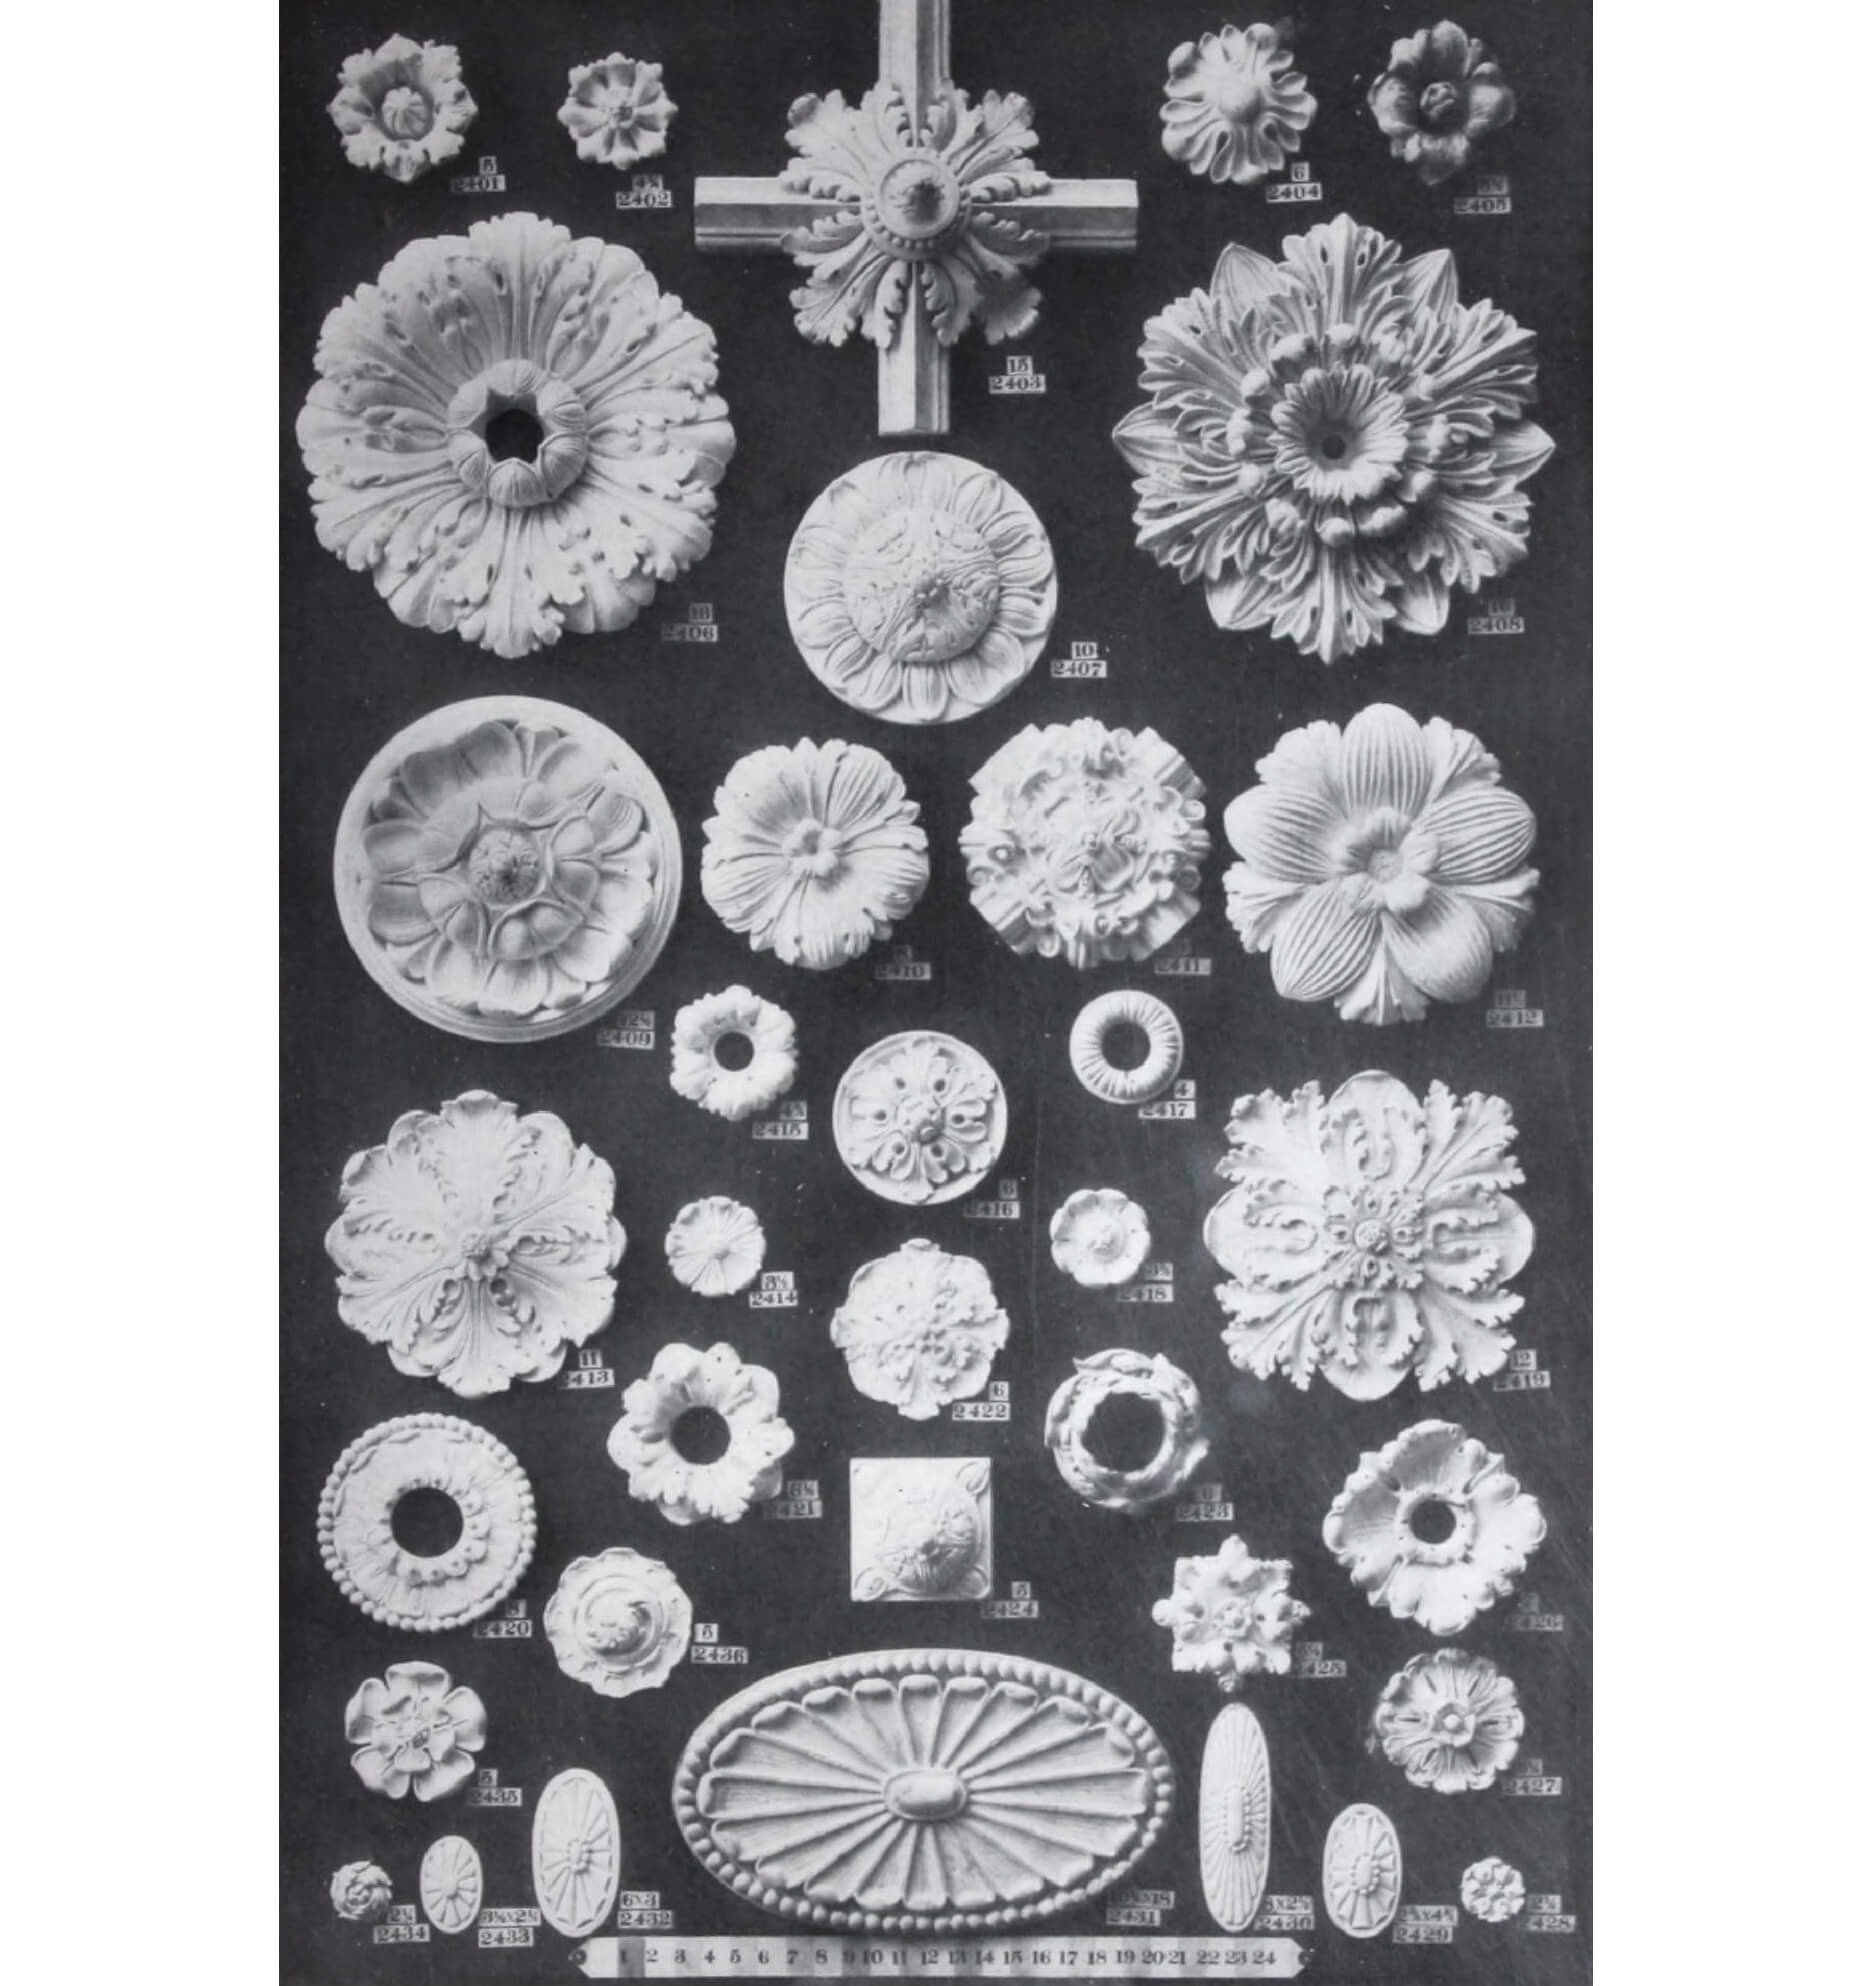 Plaster rosette samples from the circa 1909 catalog of the Architectural Decorating Company of Chicago